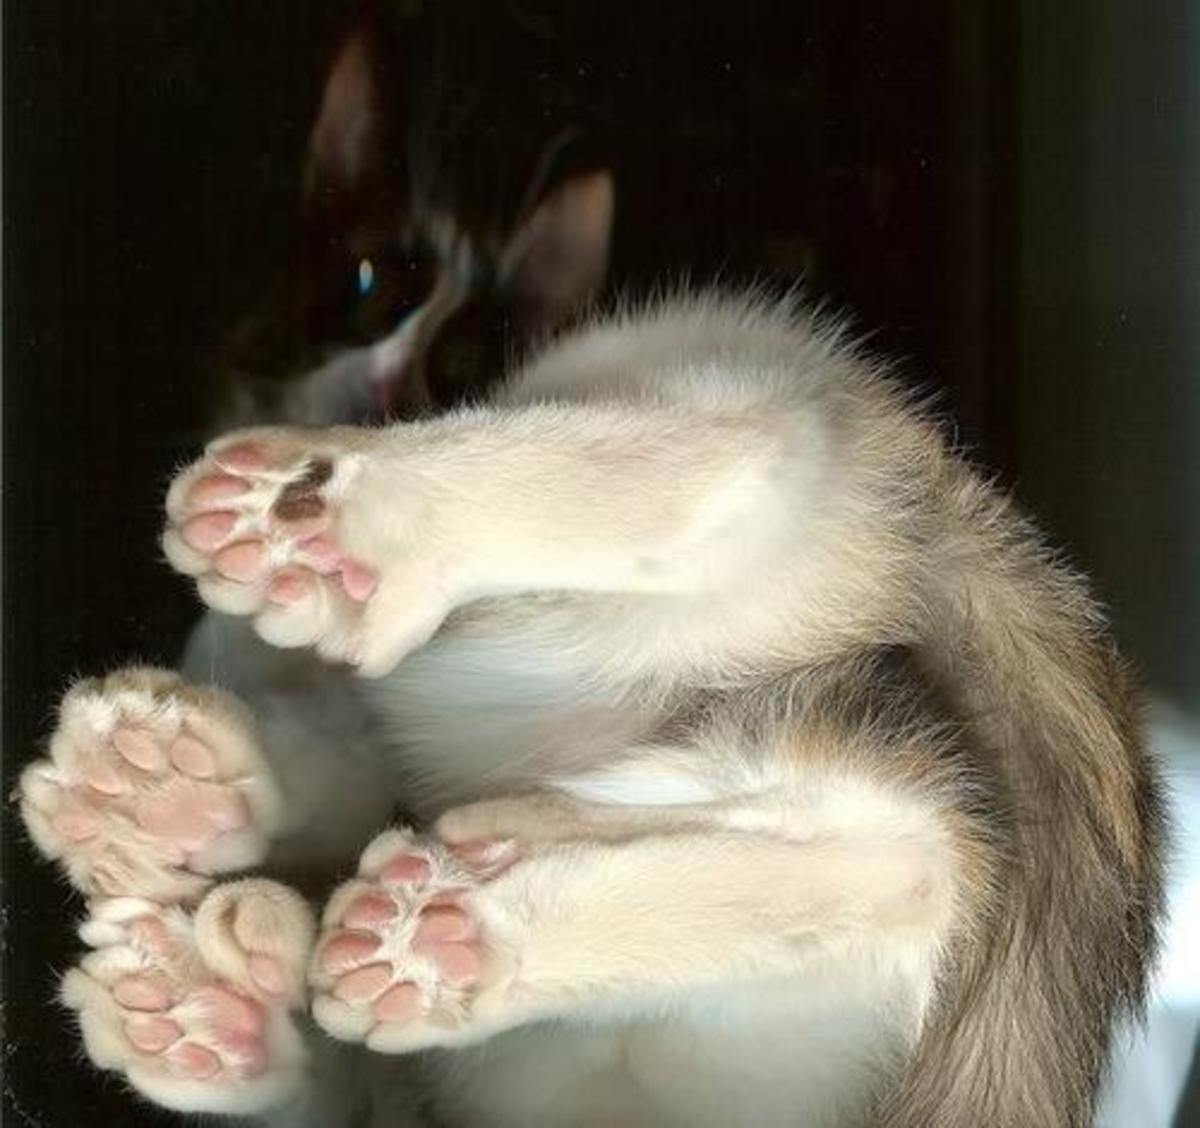 A "toes pose"!